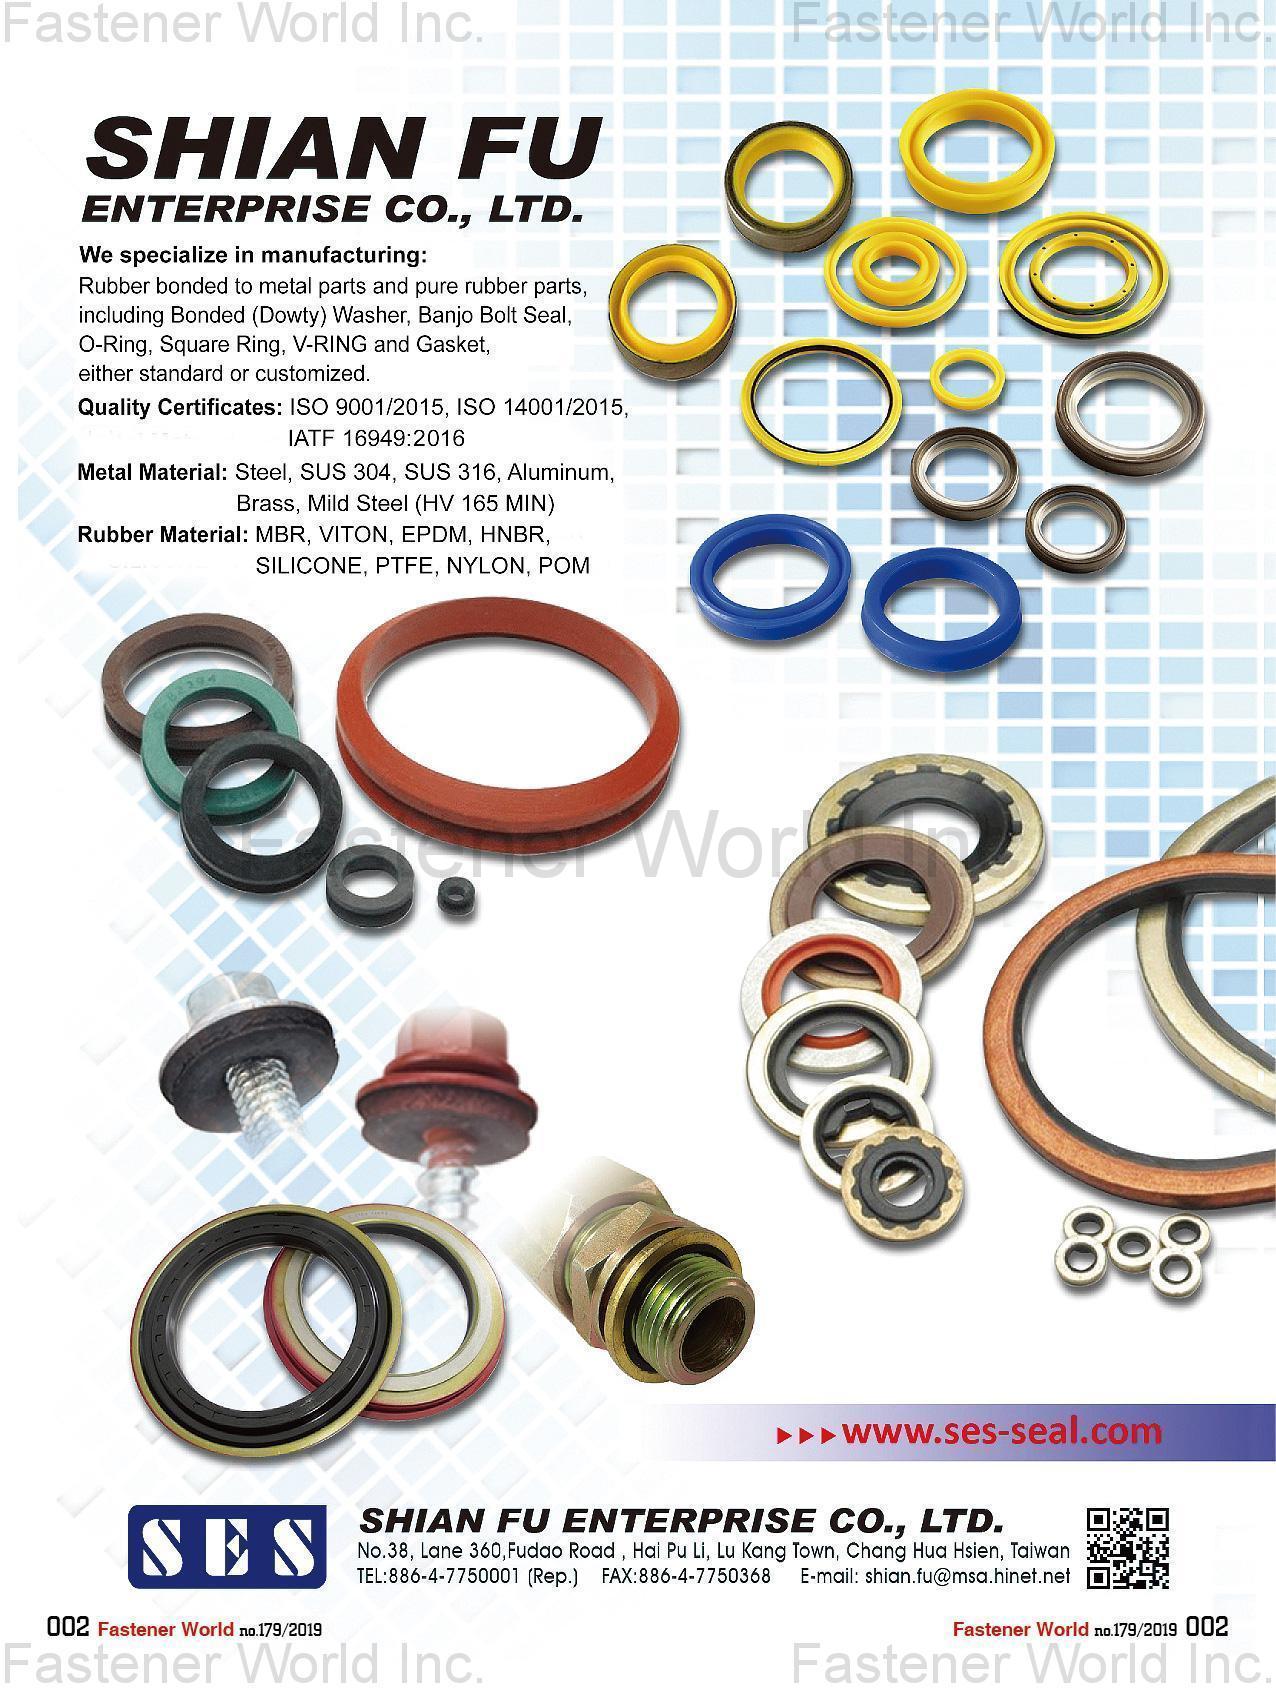 SHIAN FU ENTERPRISE CO., LTD. , Rubber Bonded to Metal Parts and Pure Rubber Parts,Bonded,Washer,Banjo Bolt Seal,O-Ring,Square Ring,V-Ring and Gasket,